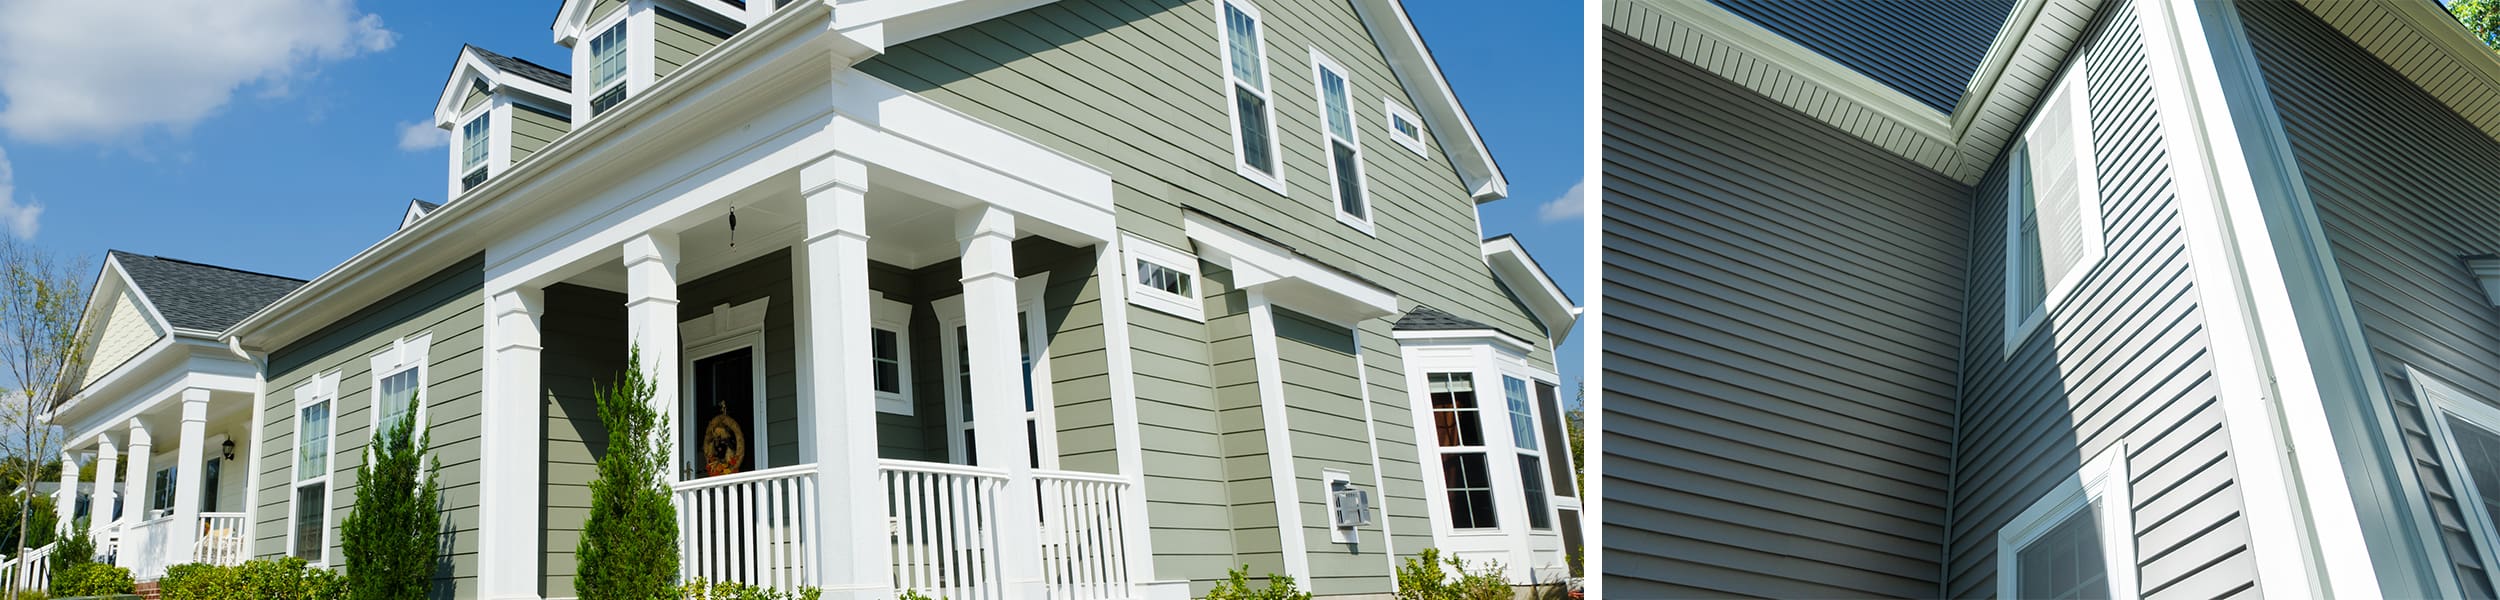 Aurora Material Solutions offers an exceptionally strong and durable line of compounds for siding applications, including AuroraTec™, AuroraFlex™ & Auroralite™.